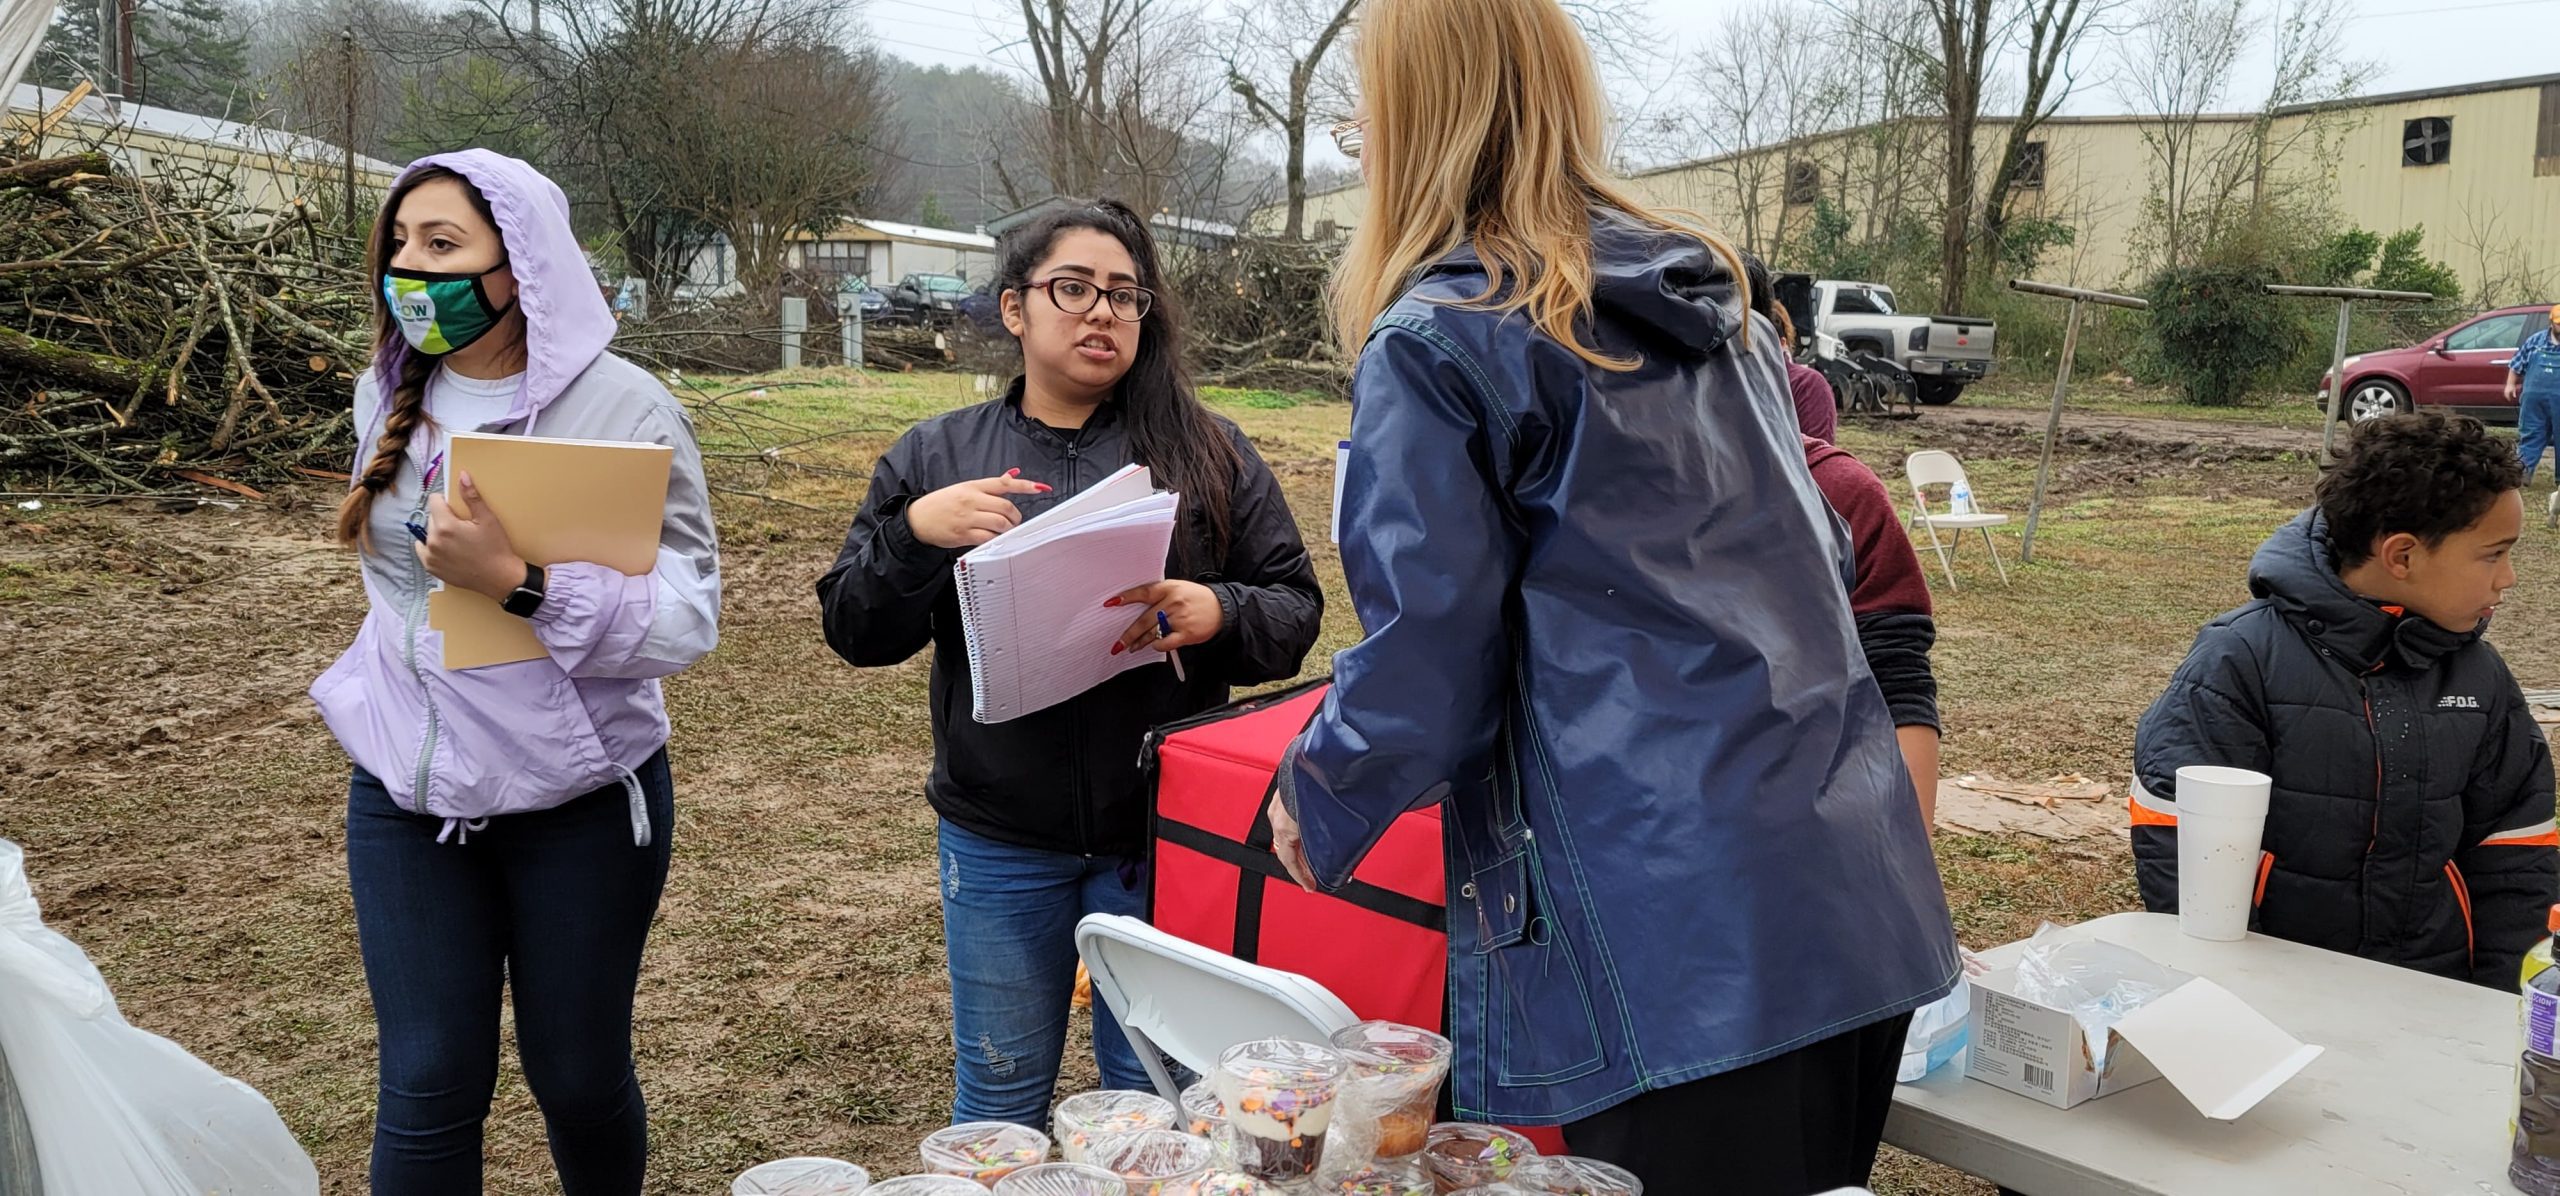 Young women return to mobile home park to help neighbors after tornado